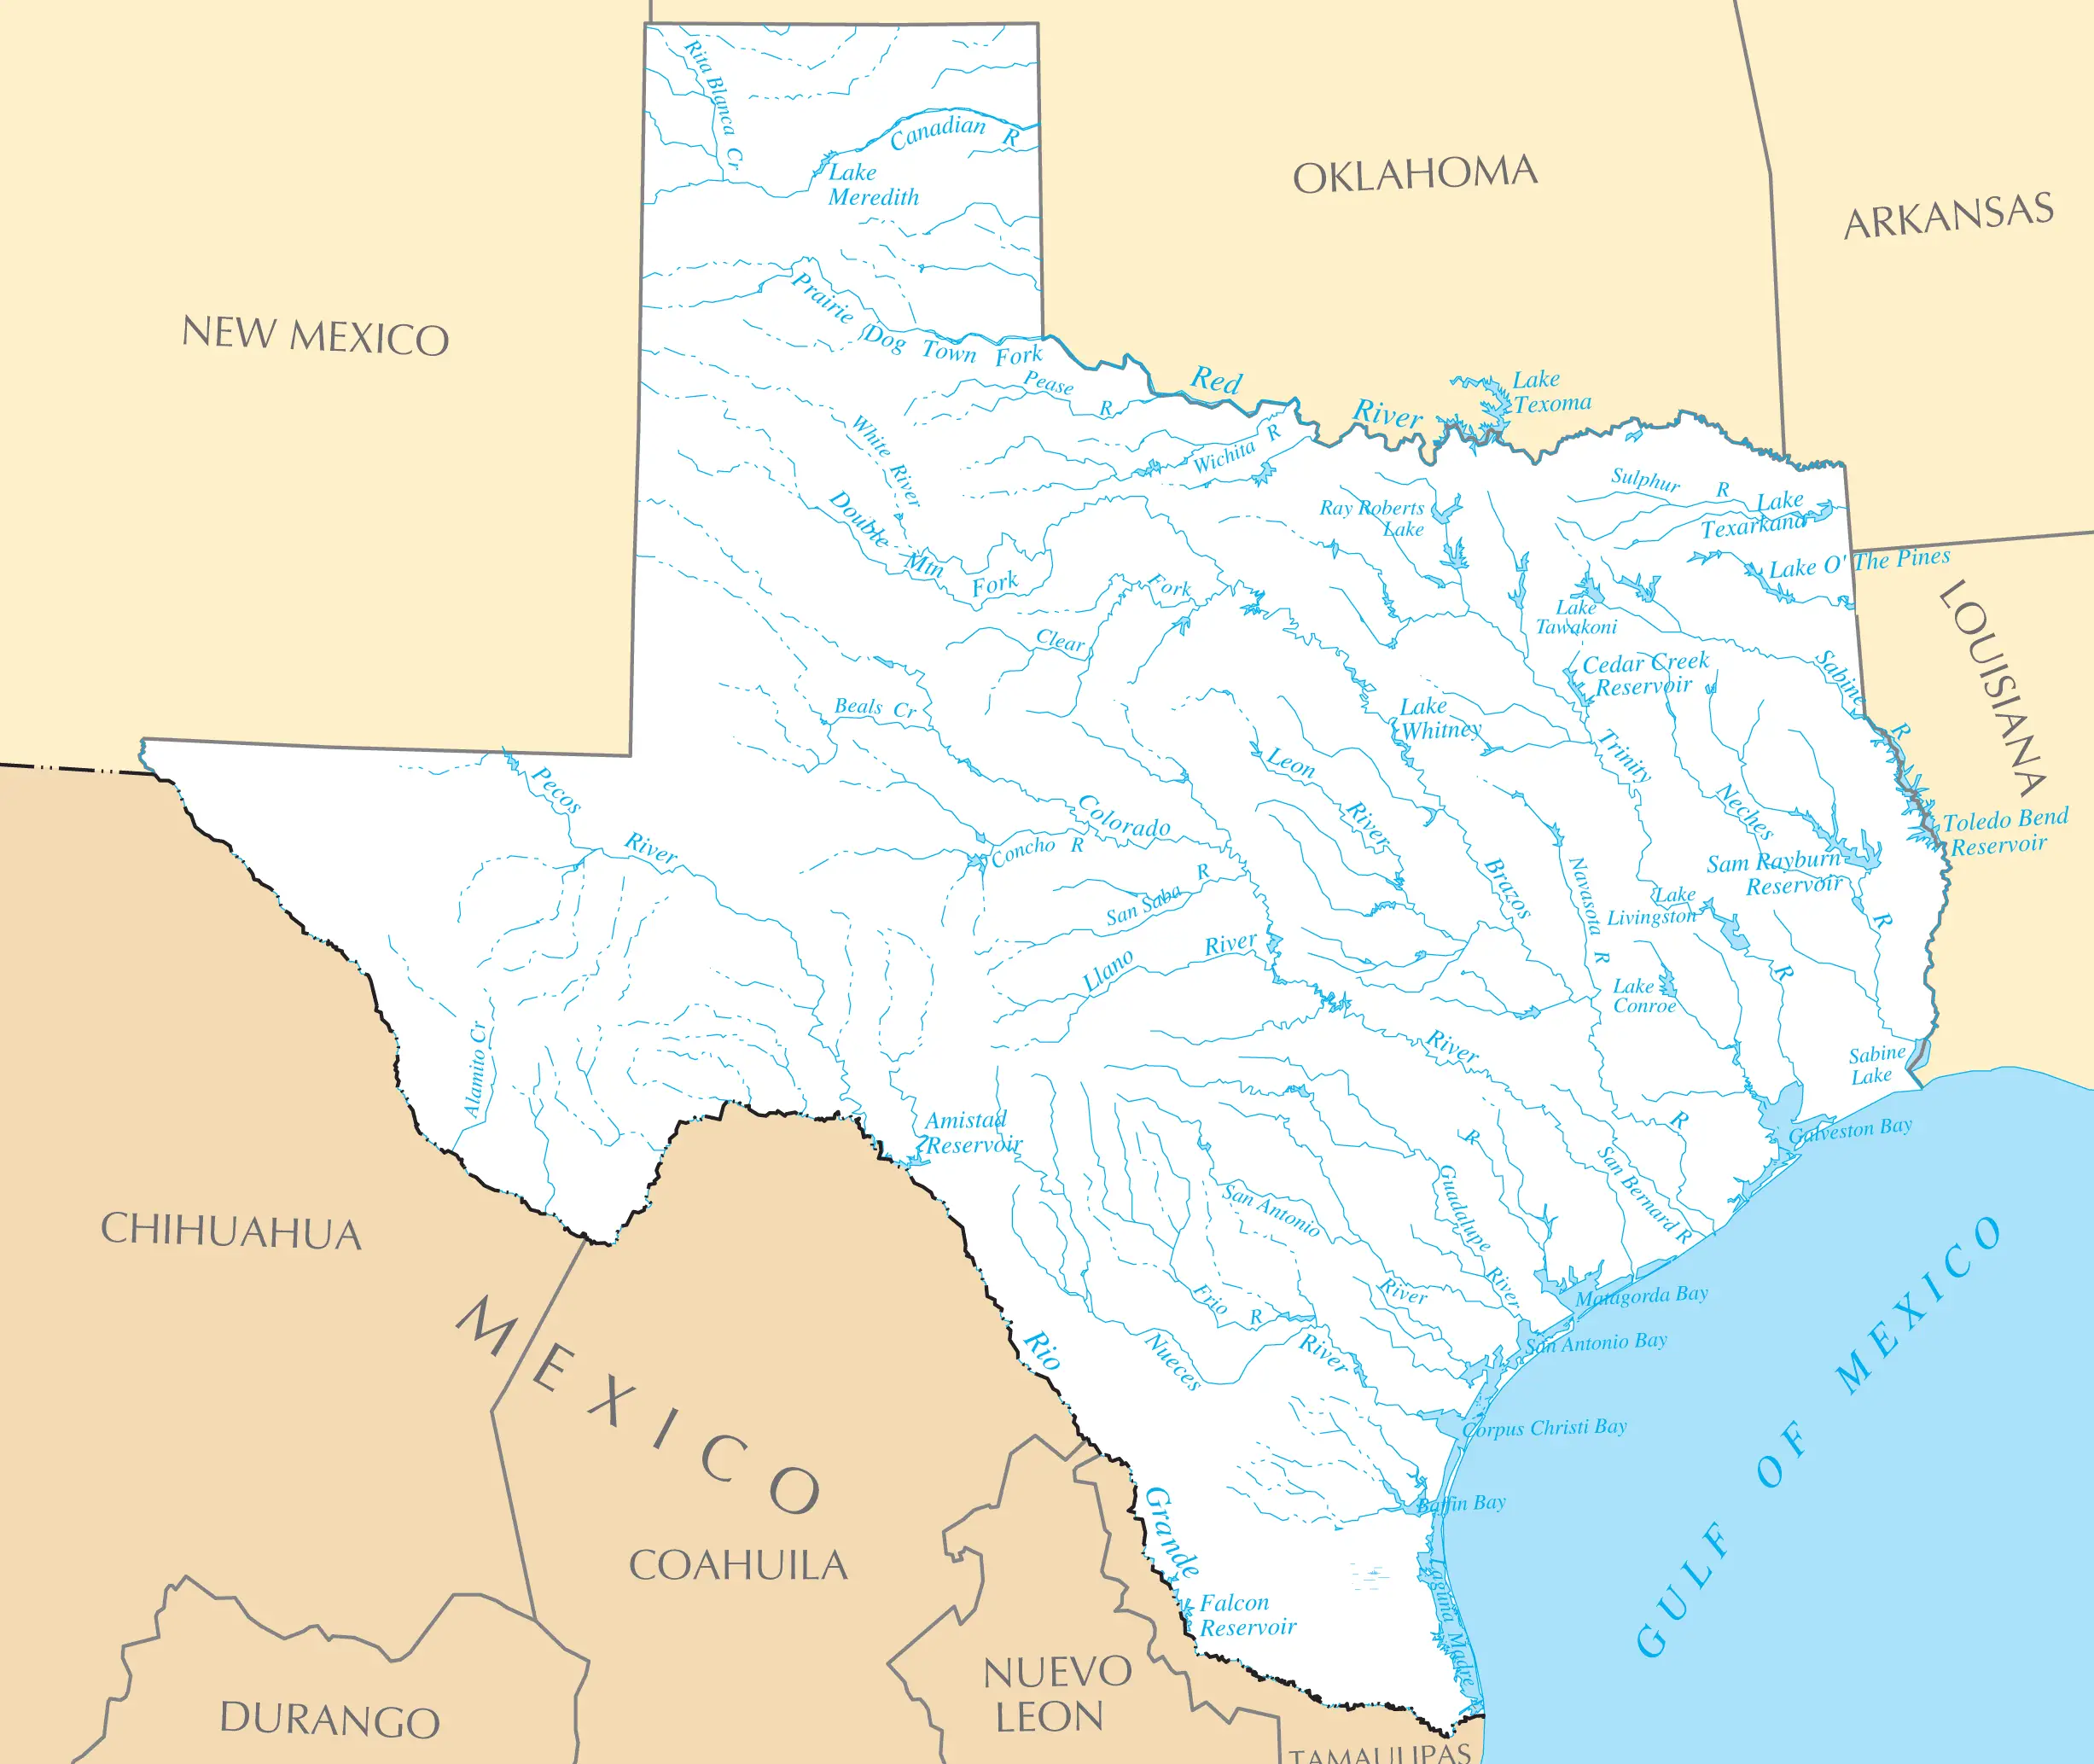 Texas Rivers And Lakes